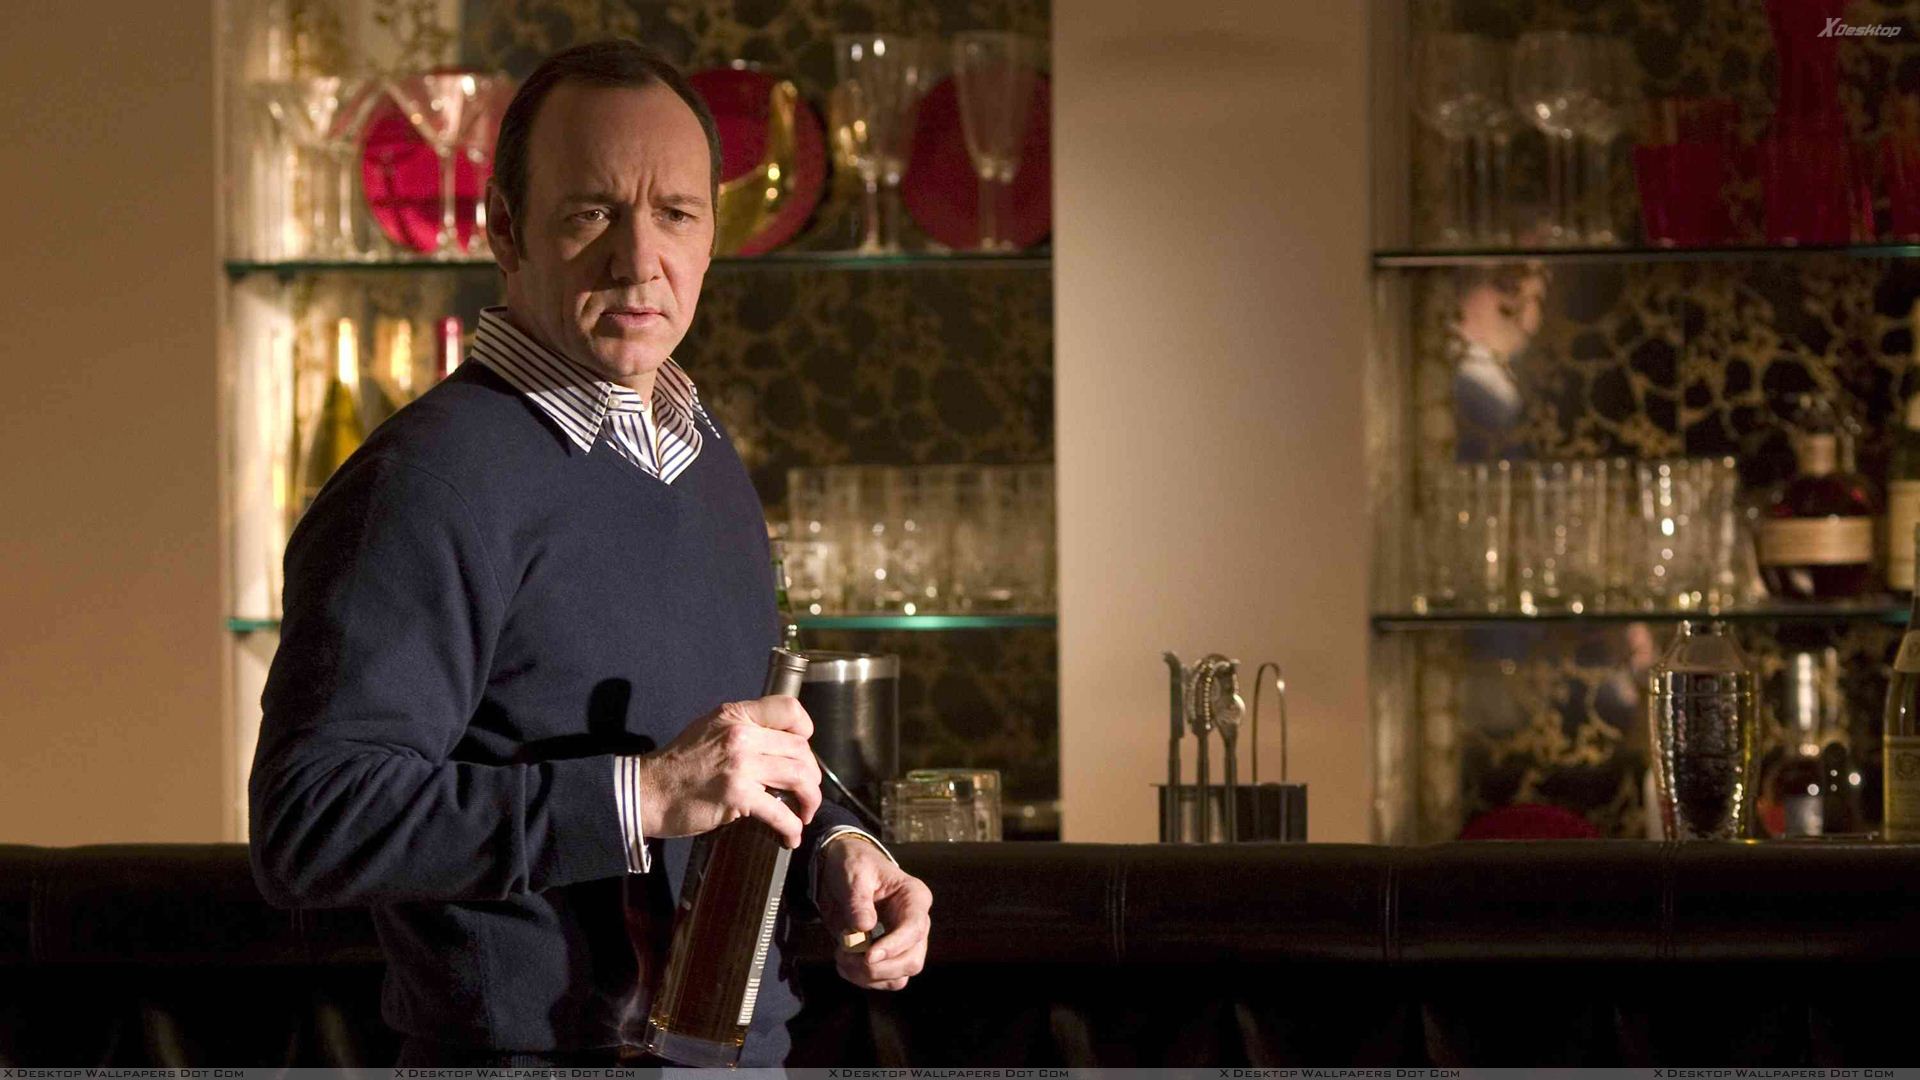 Kevin Spacey Wallpaper Photos Image In HD